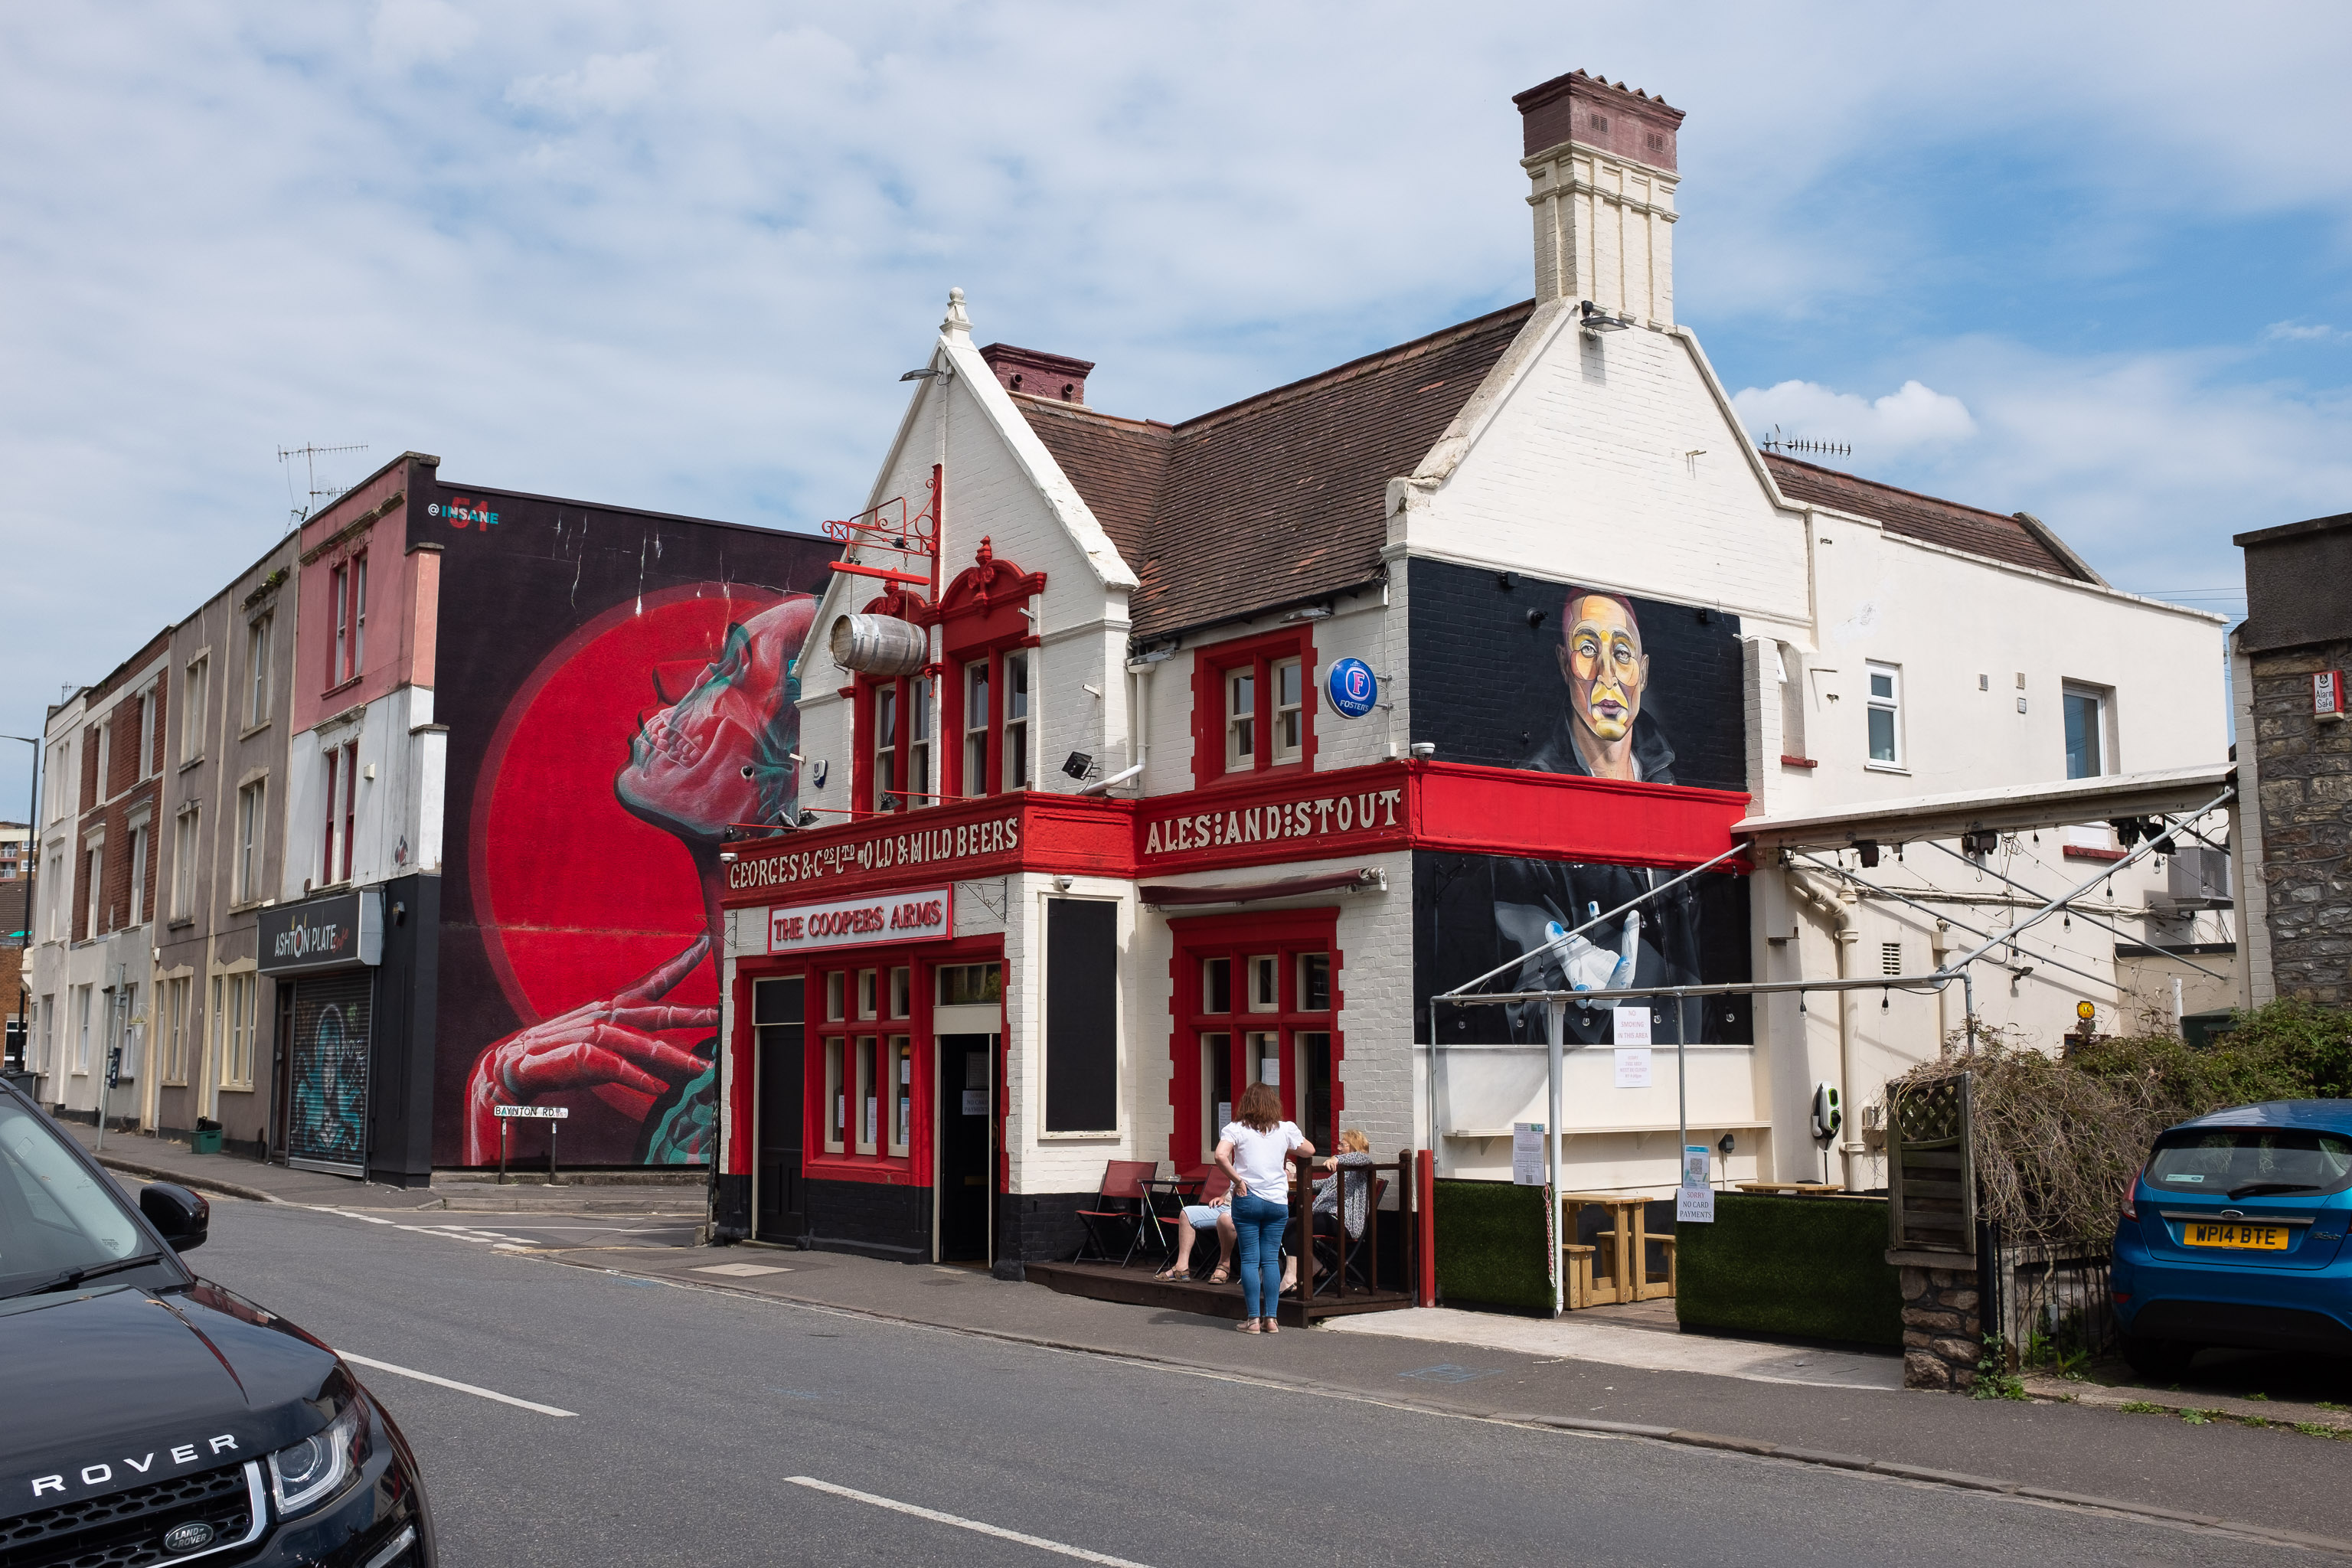 The Coopers Arms
There's an arguably better snap of it on an earlier wander, but at least you get a glimpse of the cool street art on the end of Baynton Road with t...